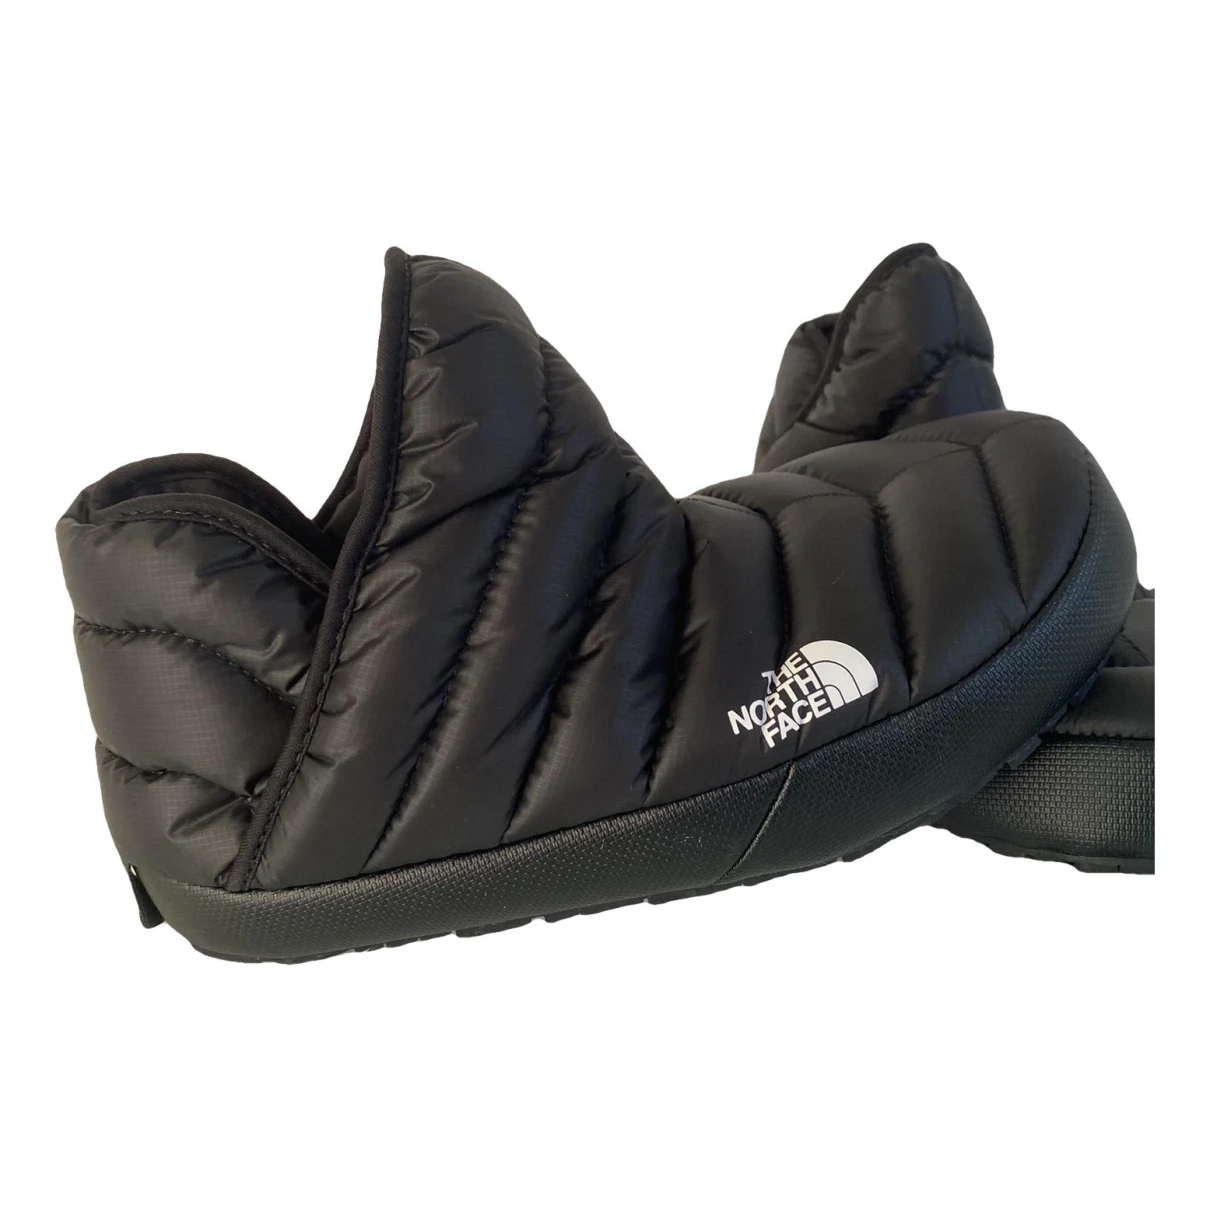 Pre-owned The North Face Snow Boots In Black